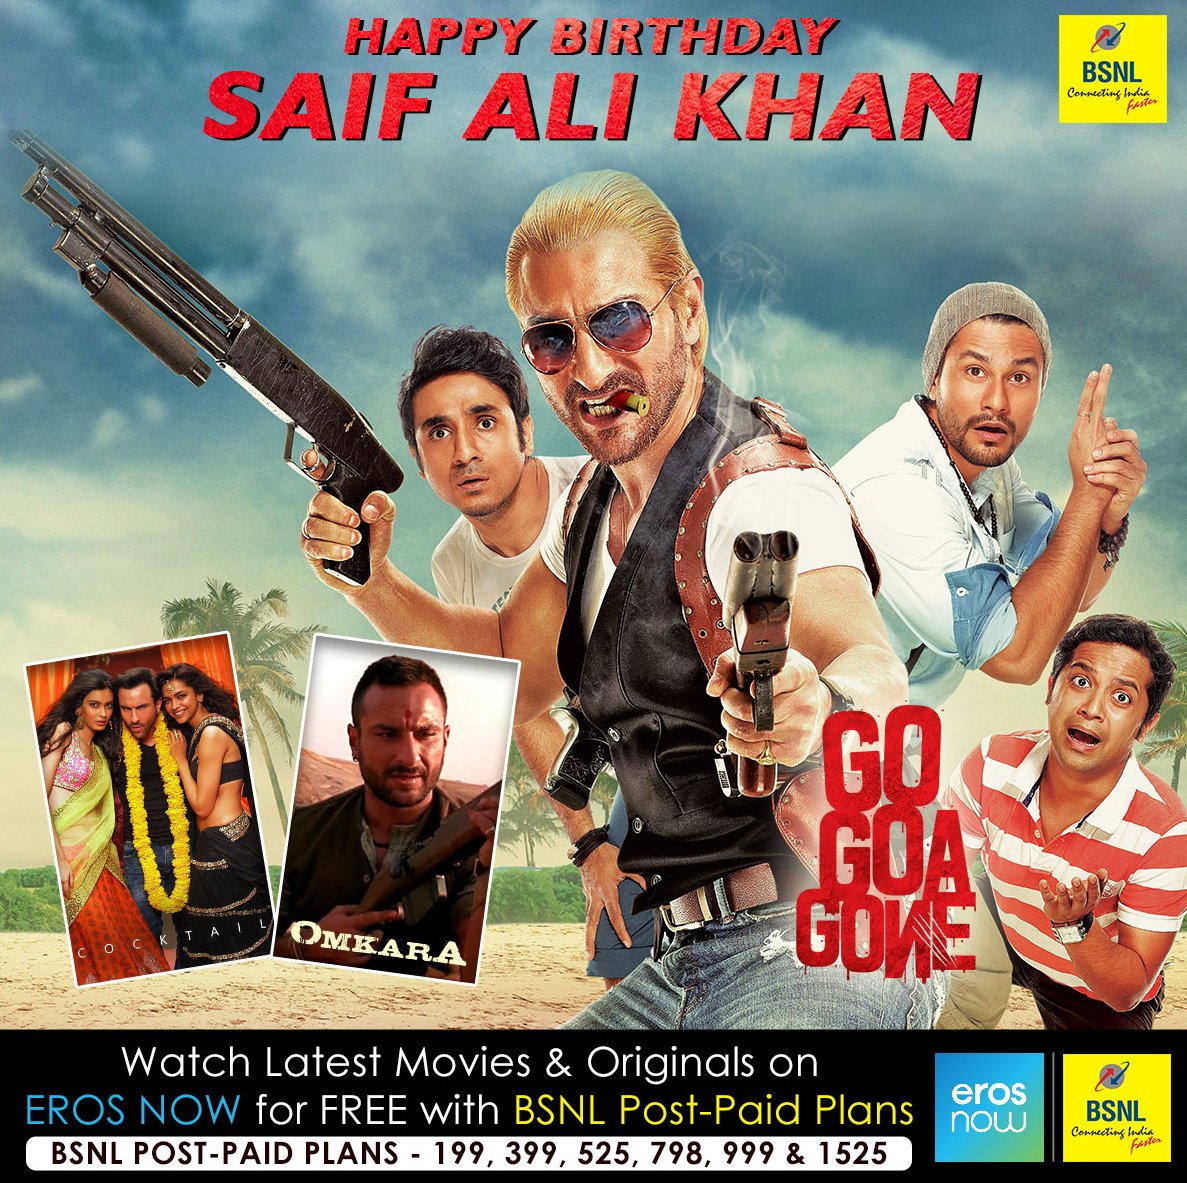 Watch latest movies and originals on NOW for FREE on BSNL post paid plans.
Happy BirthDay Saif Ali Khan. 